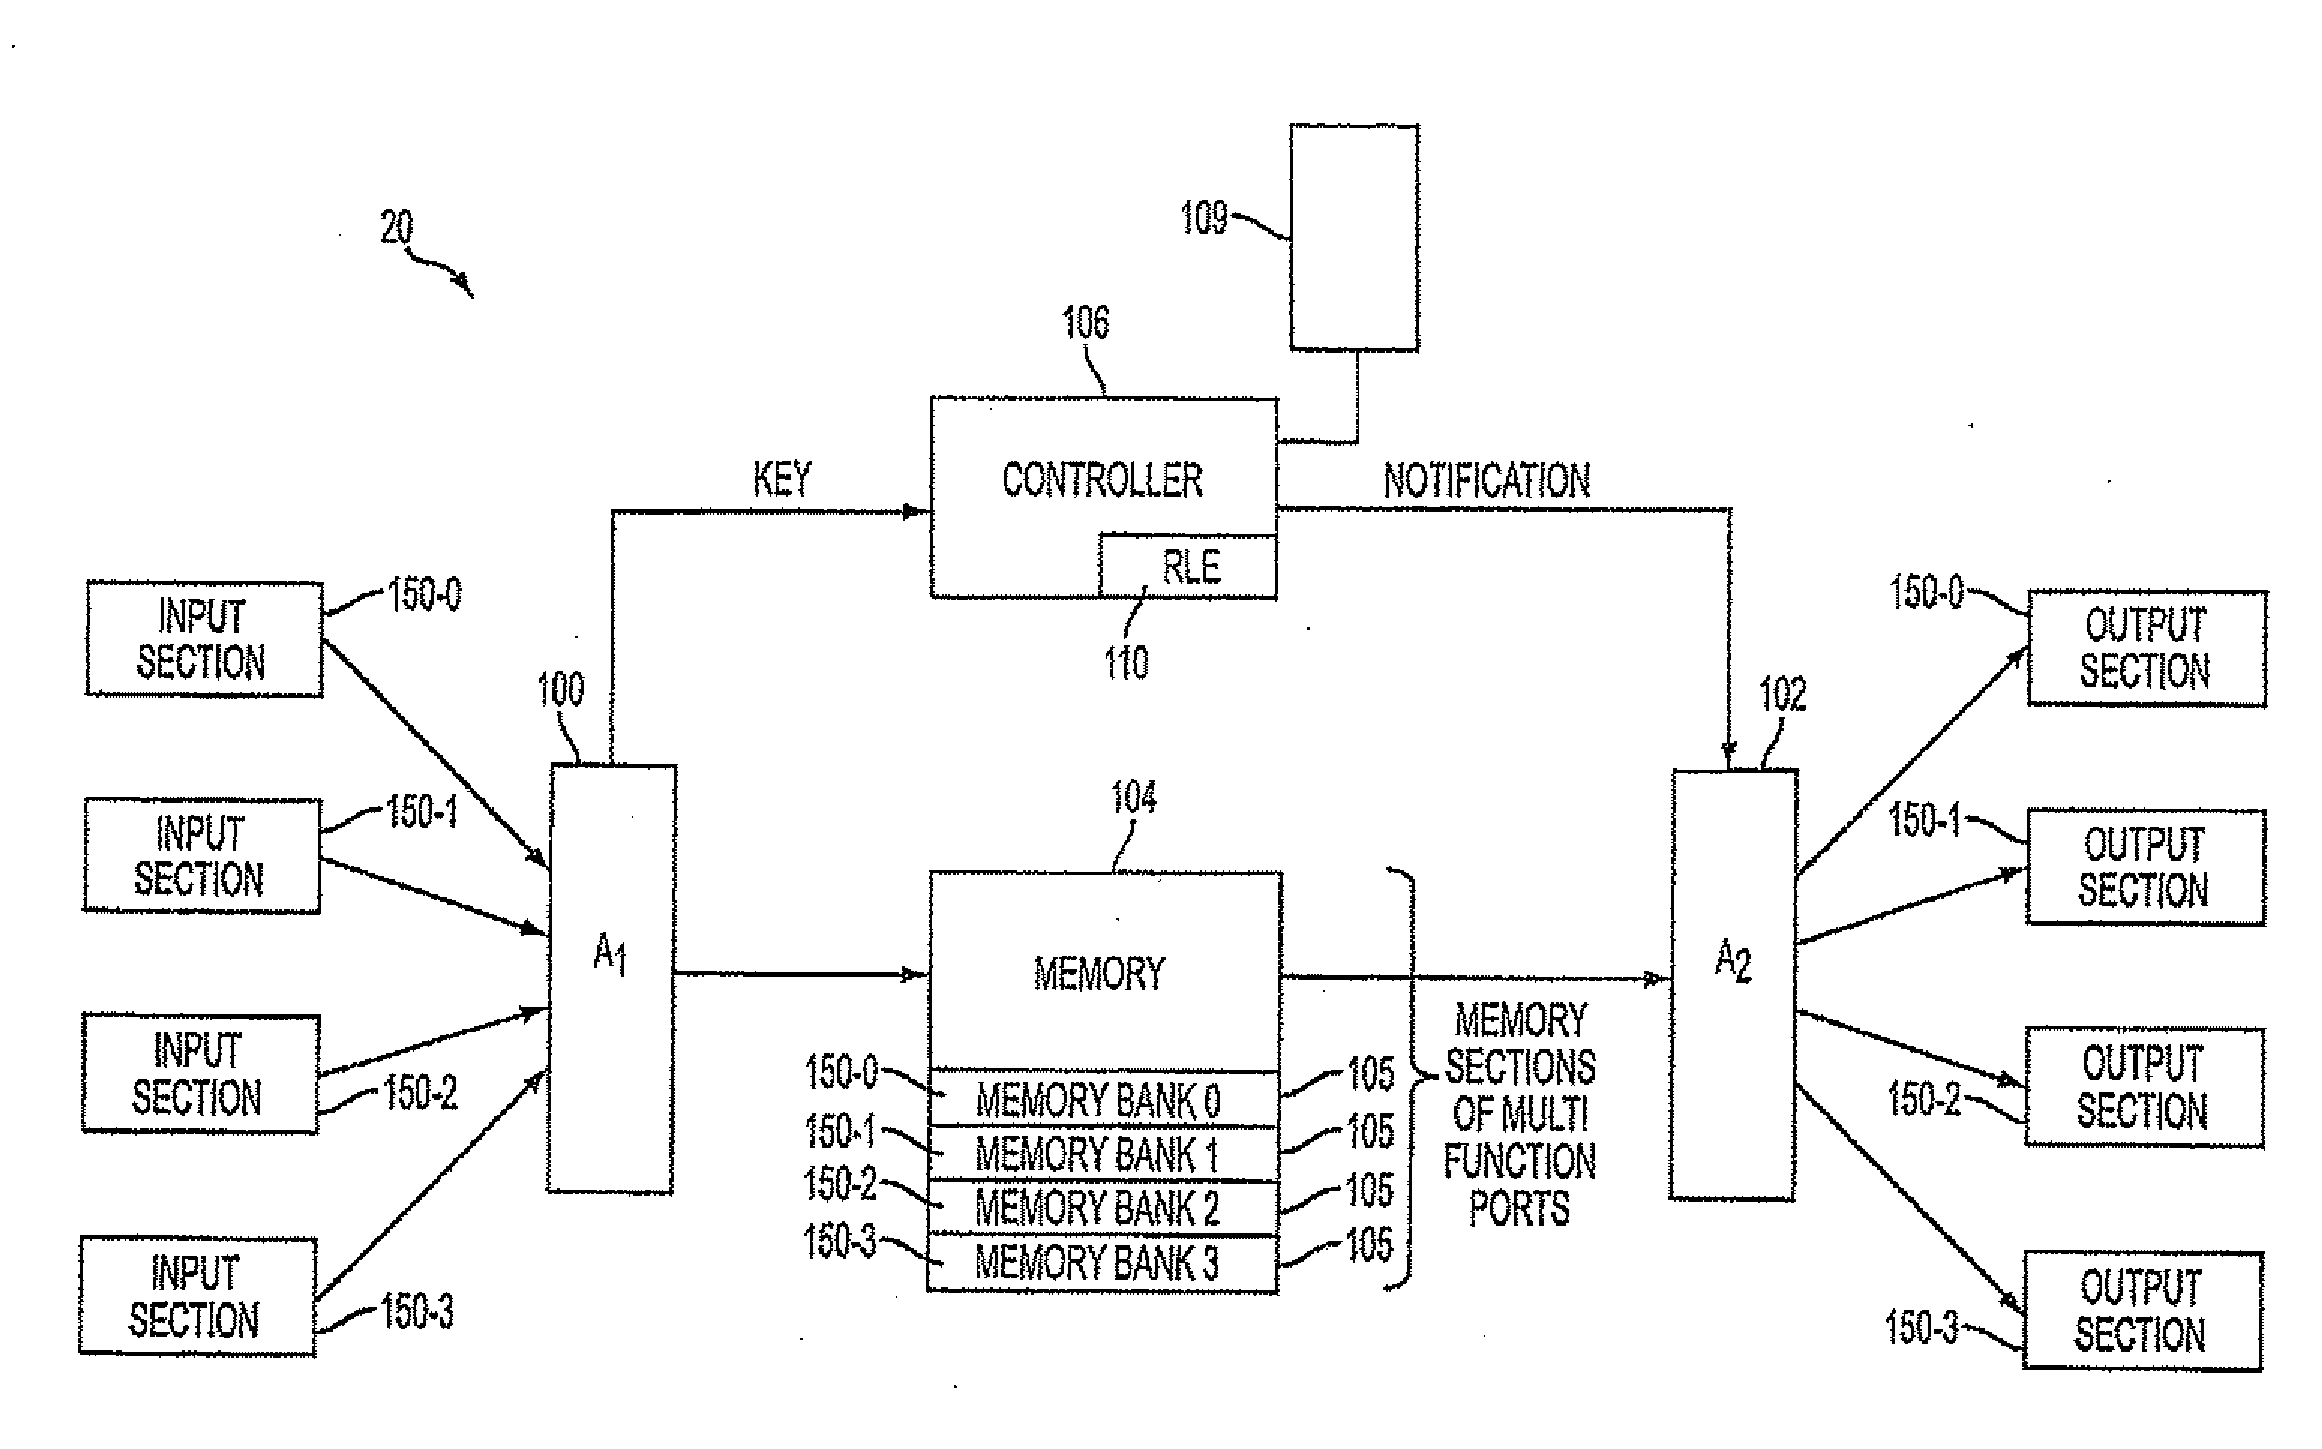 Filtering and route lookup in a switching device